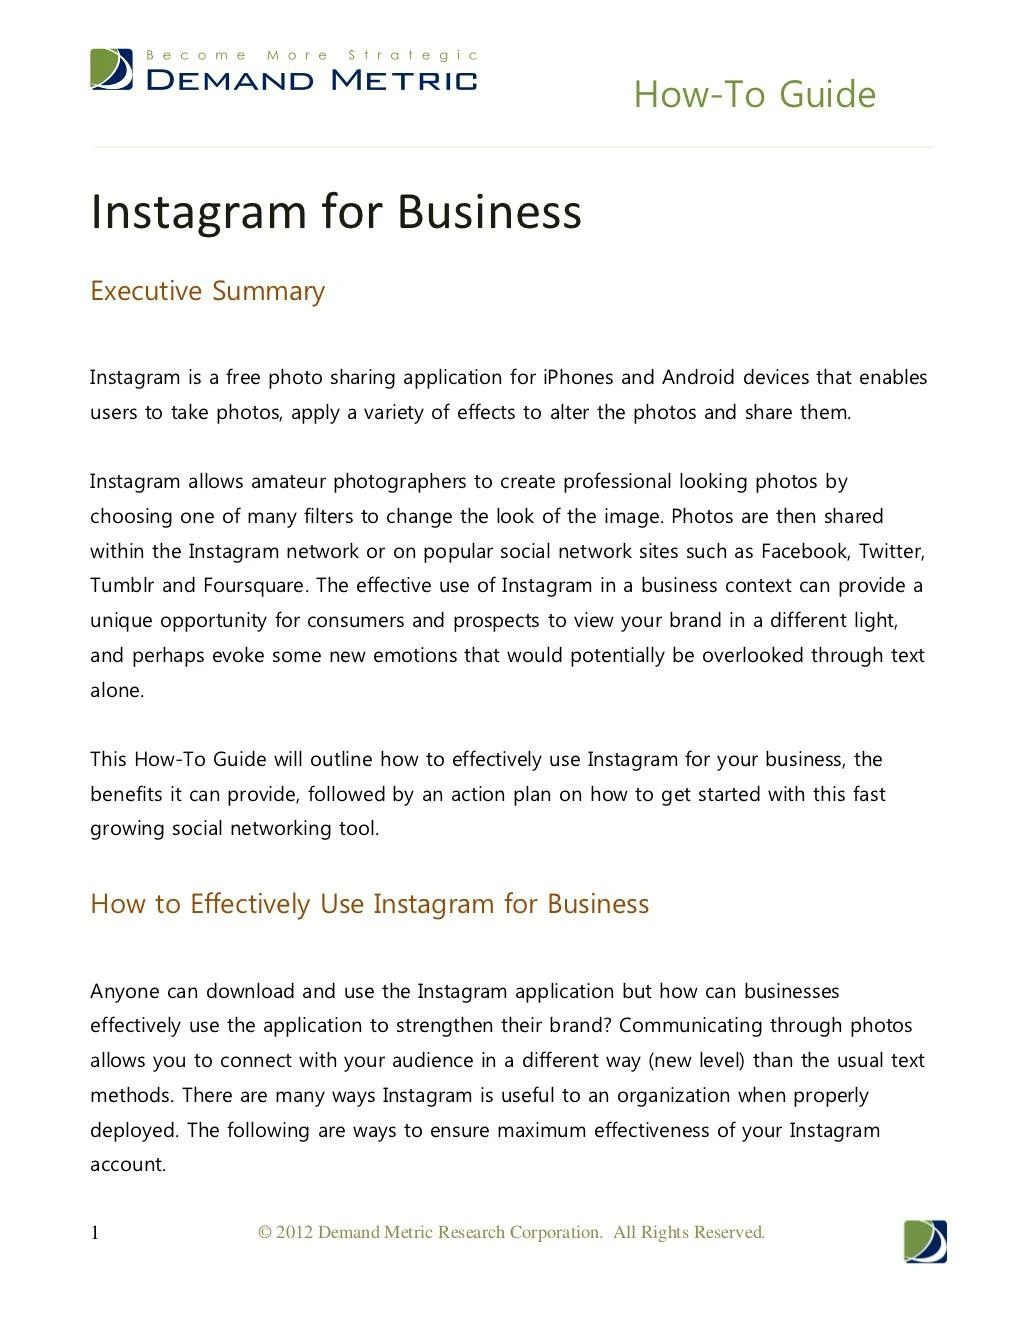 effective use of instagram for business